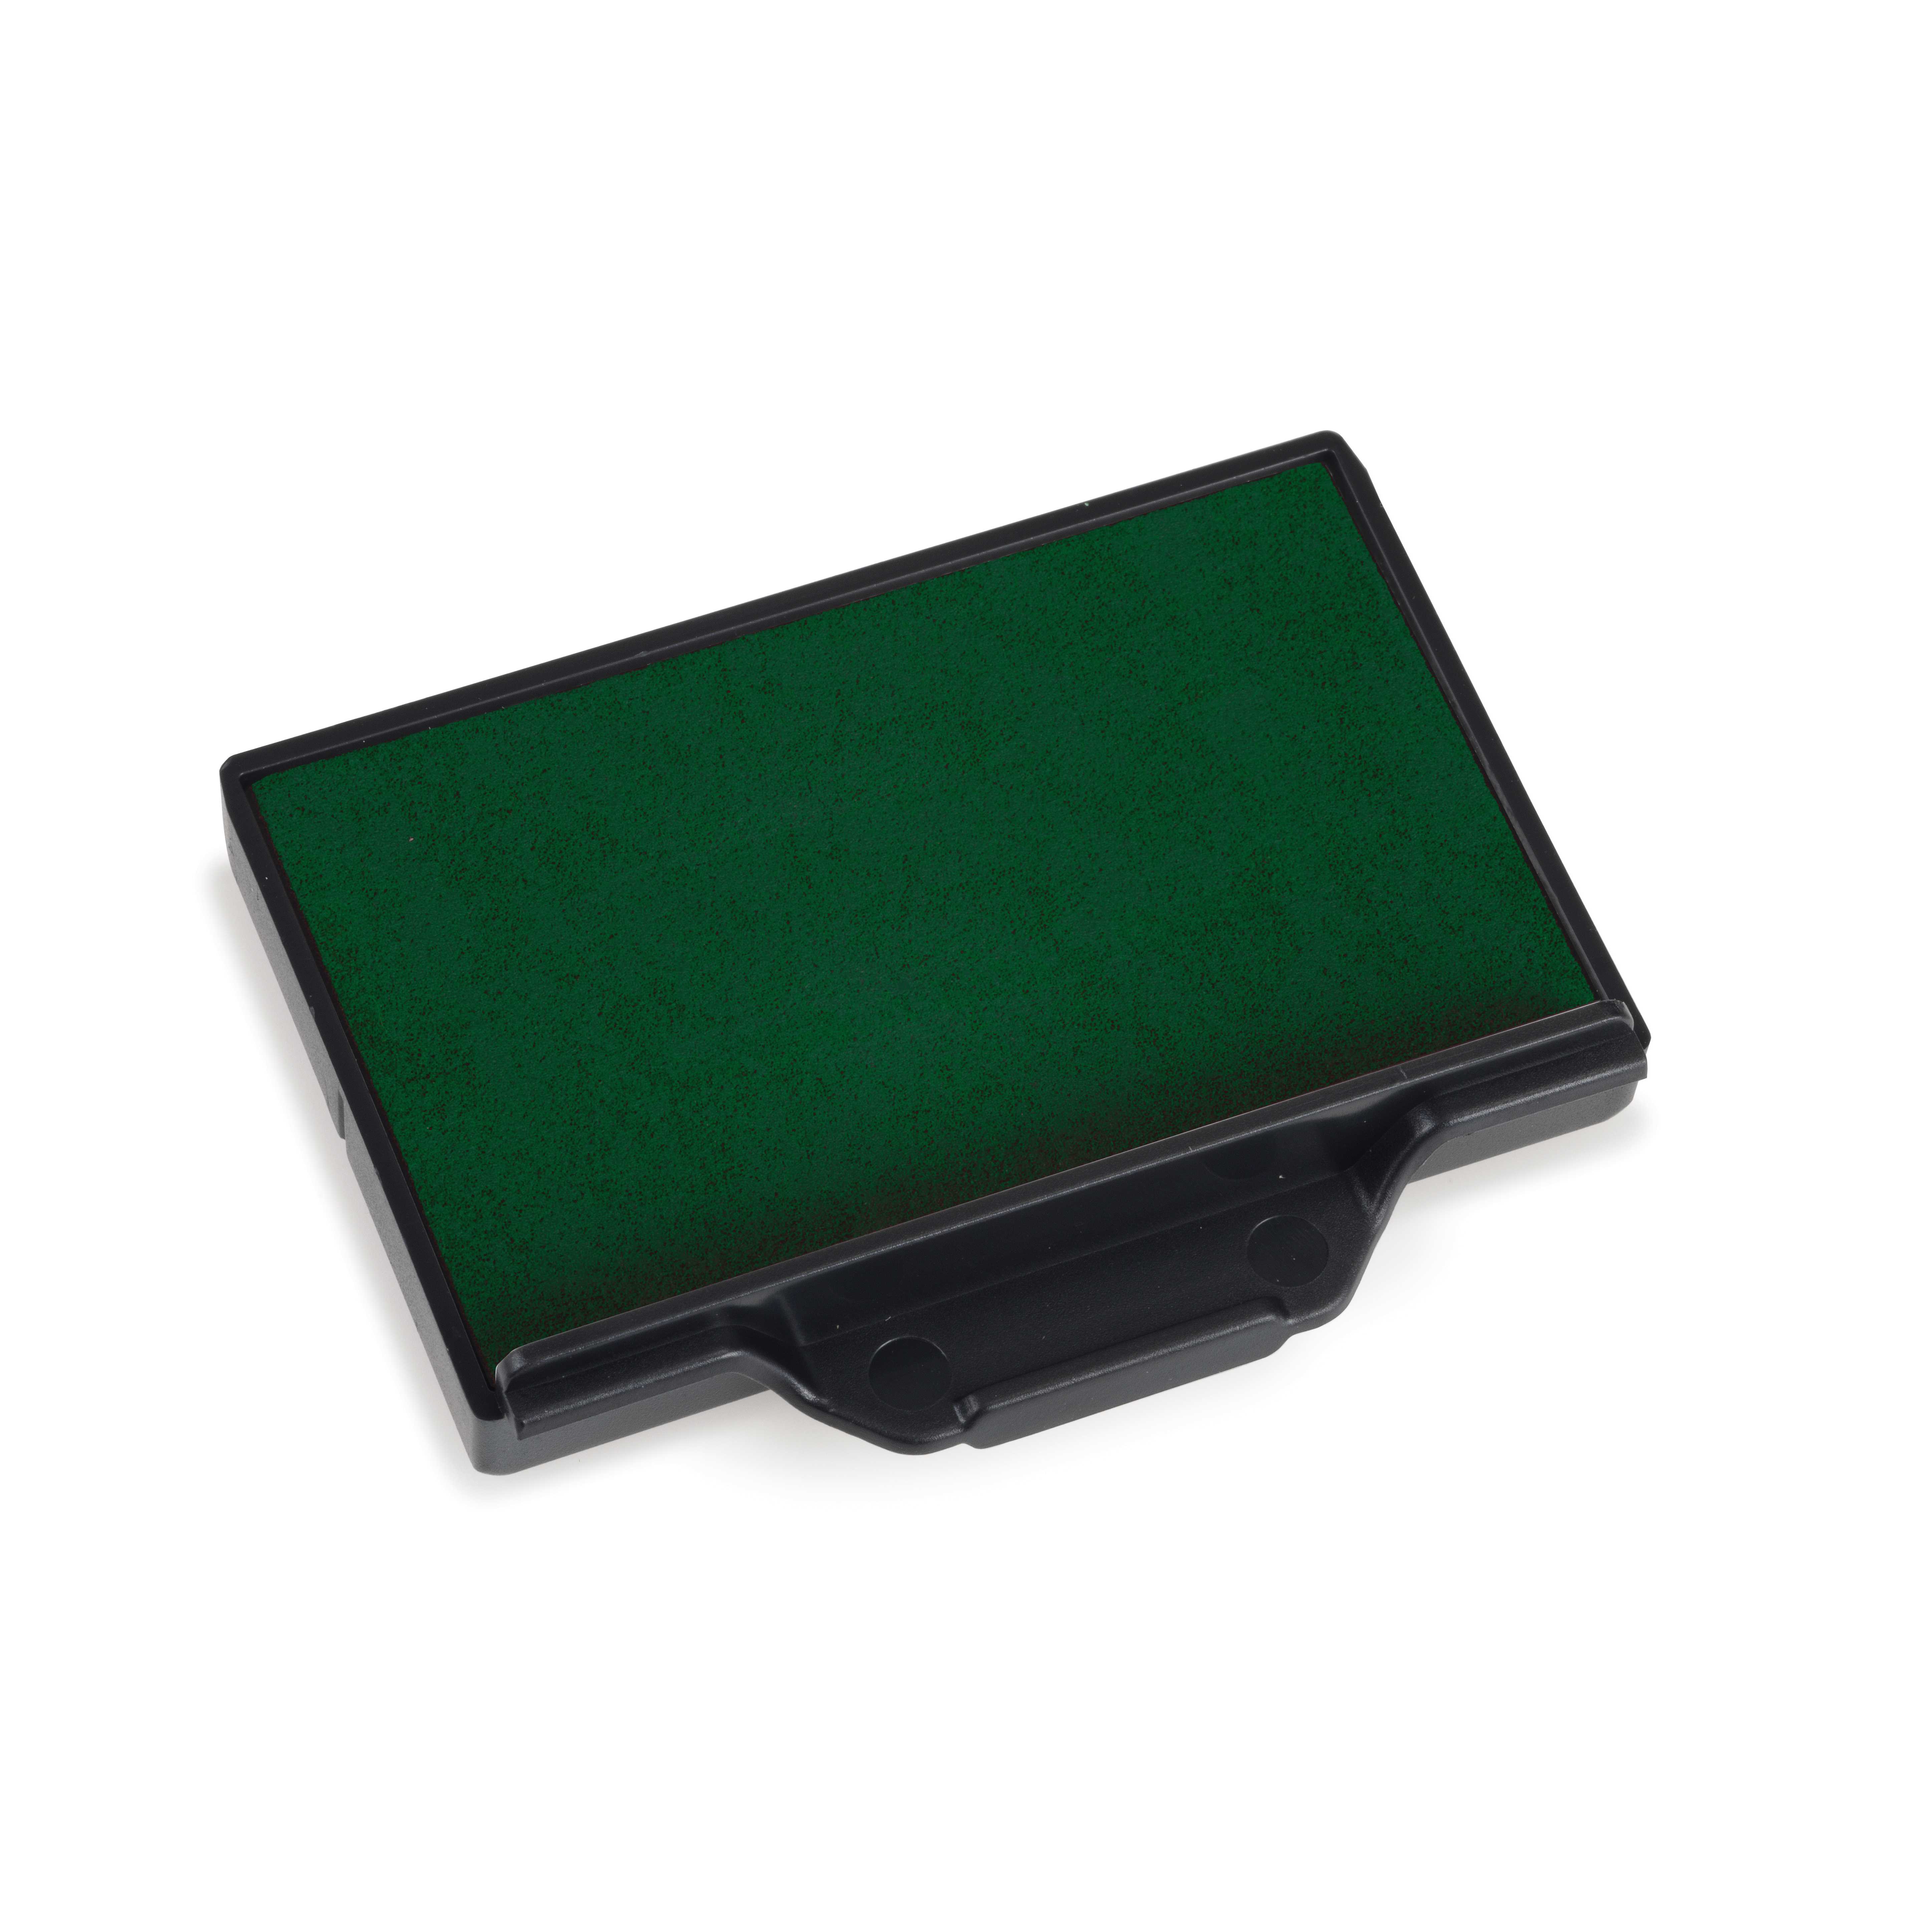 Replacement Pad for Trodat 5206 Self Inking Stamp - Green Ink Color